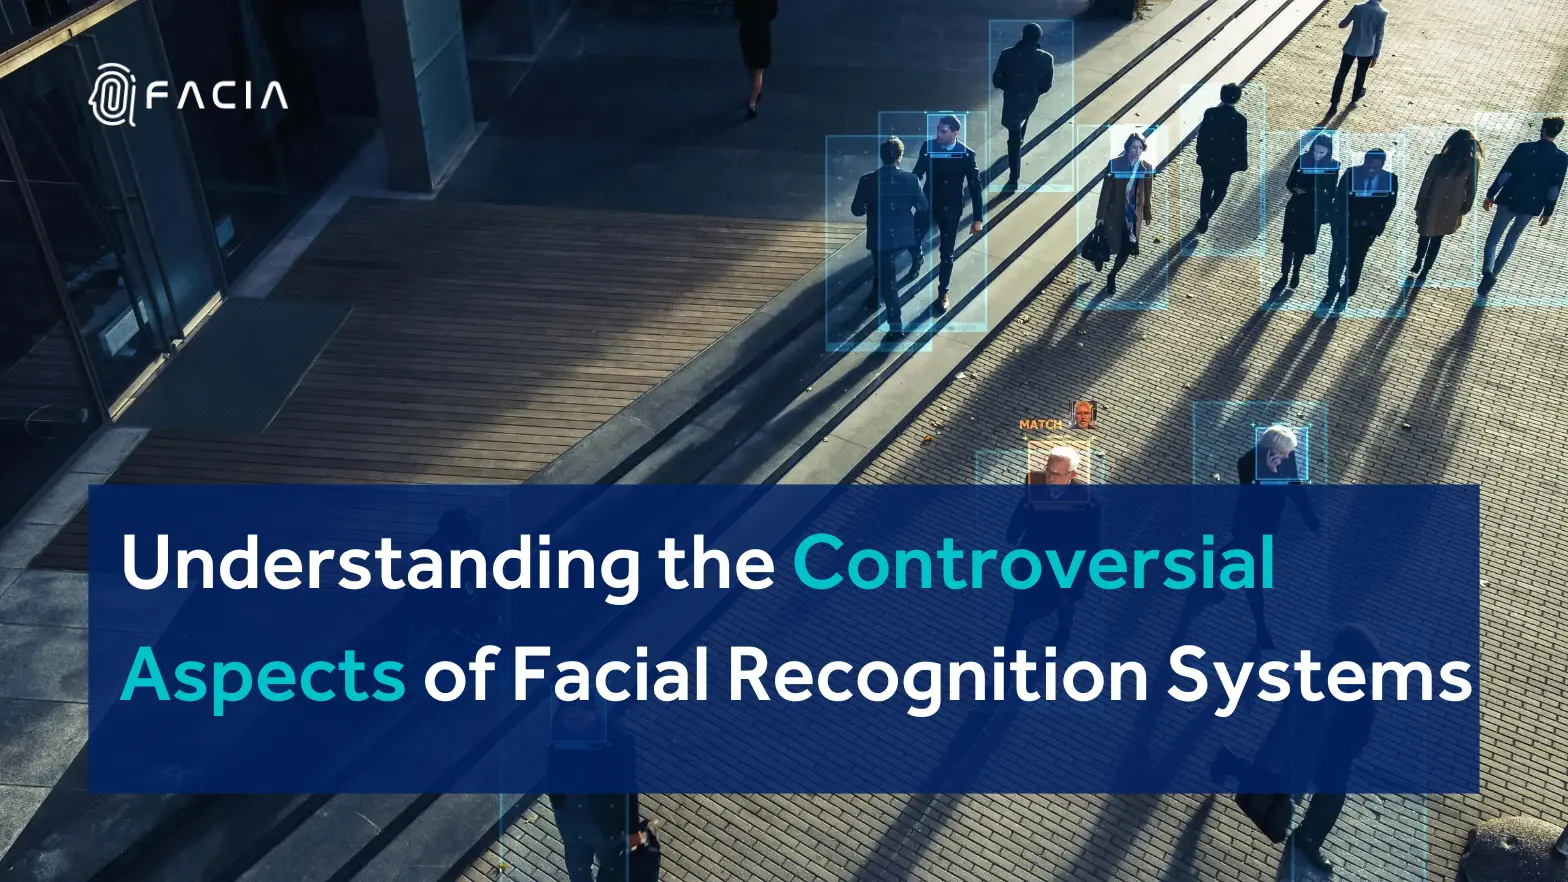 highlighting the controversial aspects of facial recognition systems, including concerns about privacy, surveillance, and potential biases